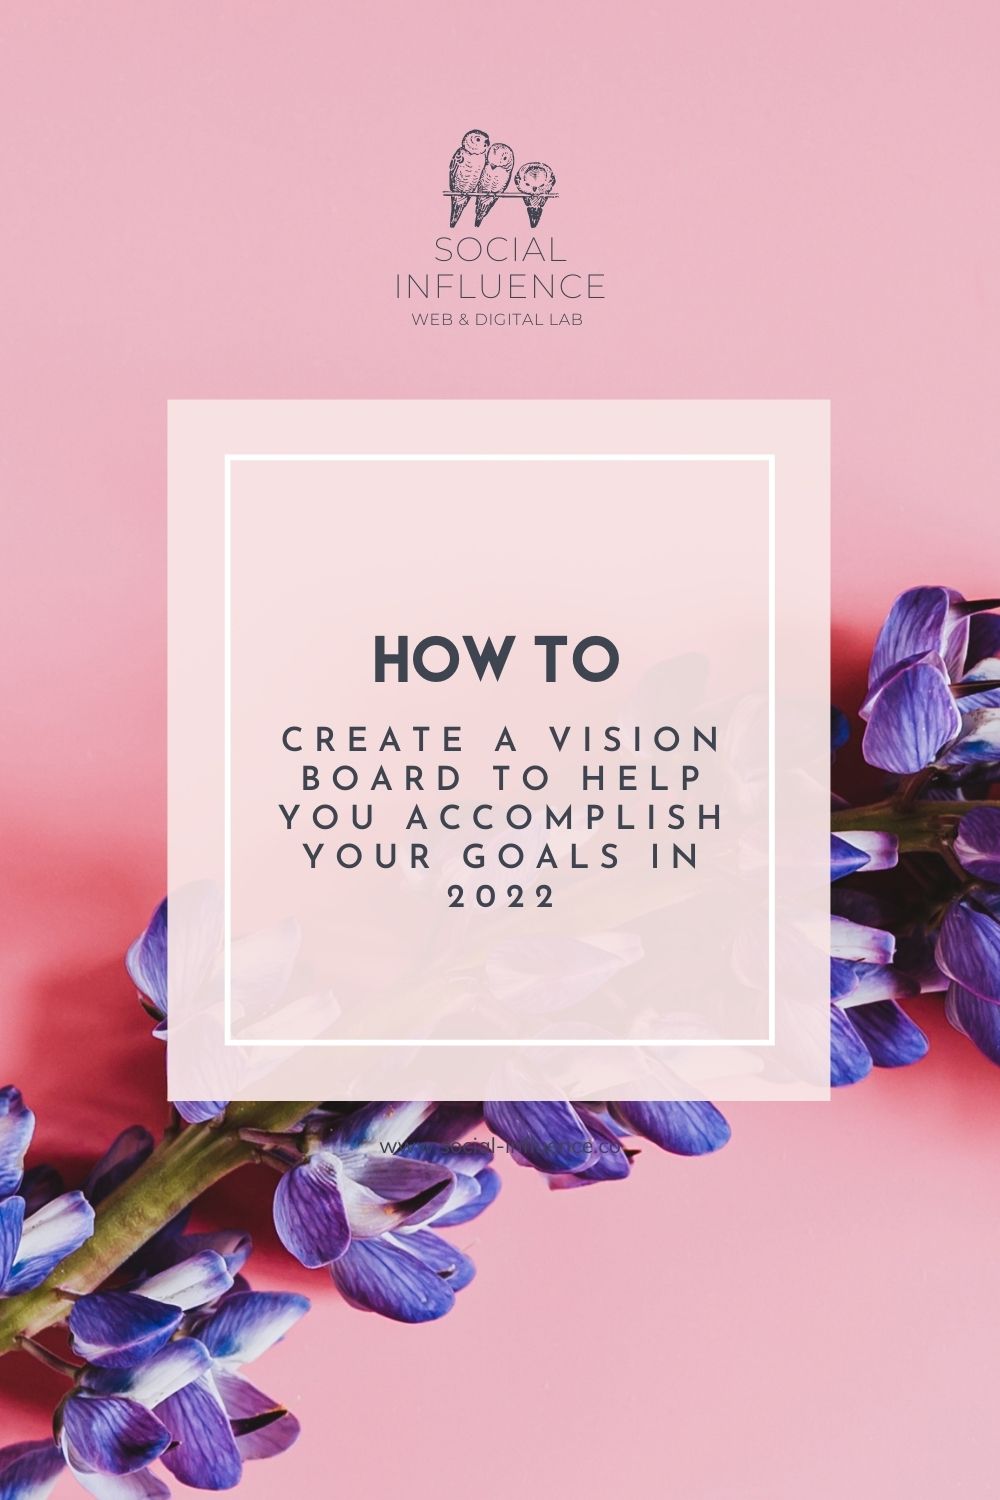 How to Create A Vision Board To Help You Accomplish Your Goals In 2022 written on a plain pink background with purple flowers